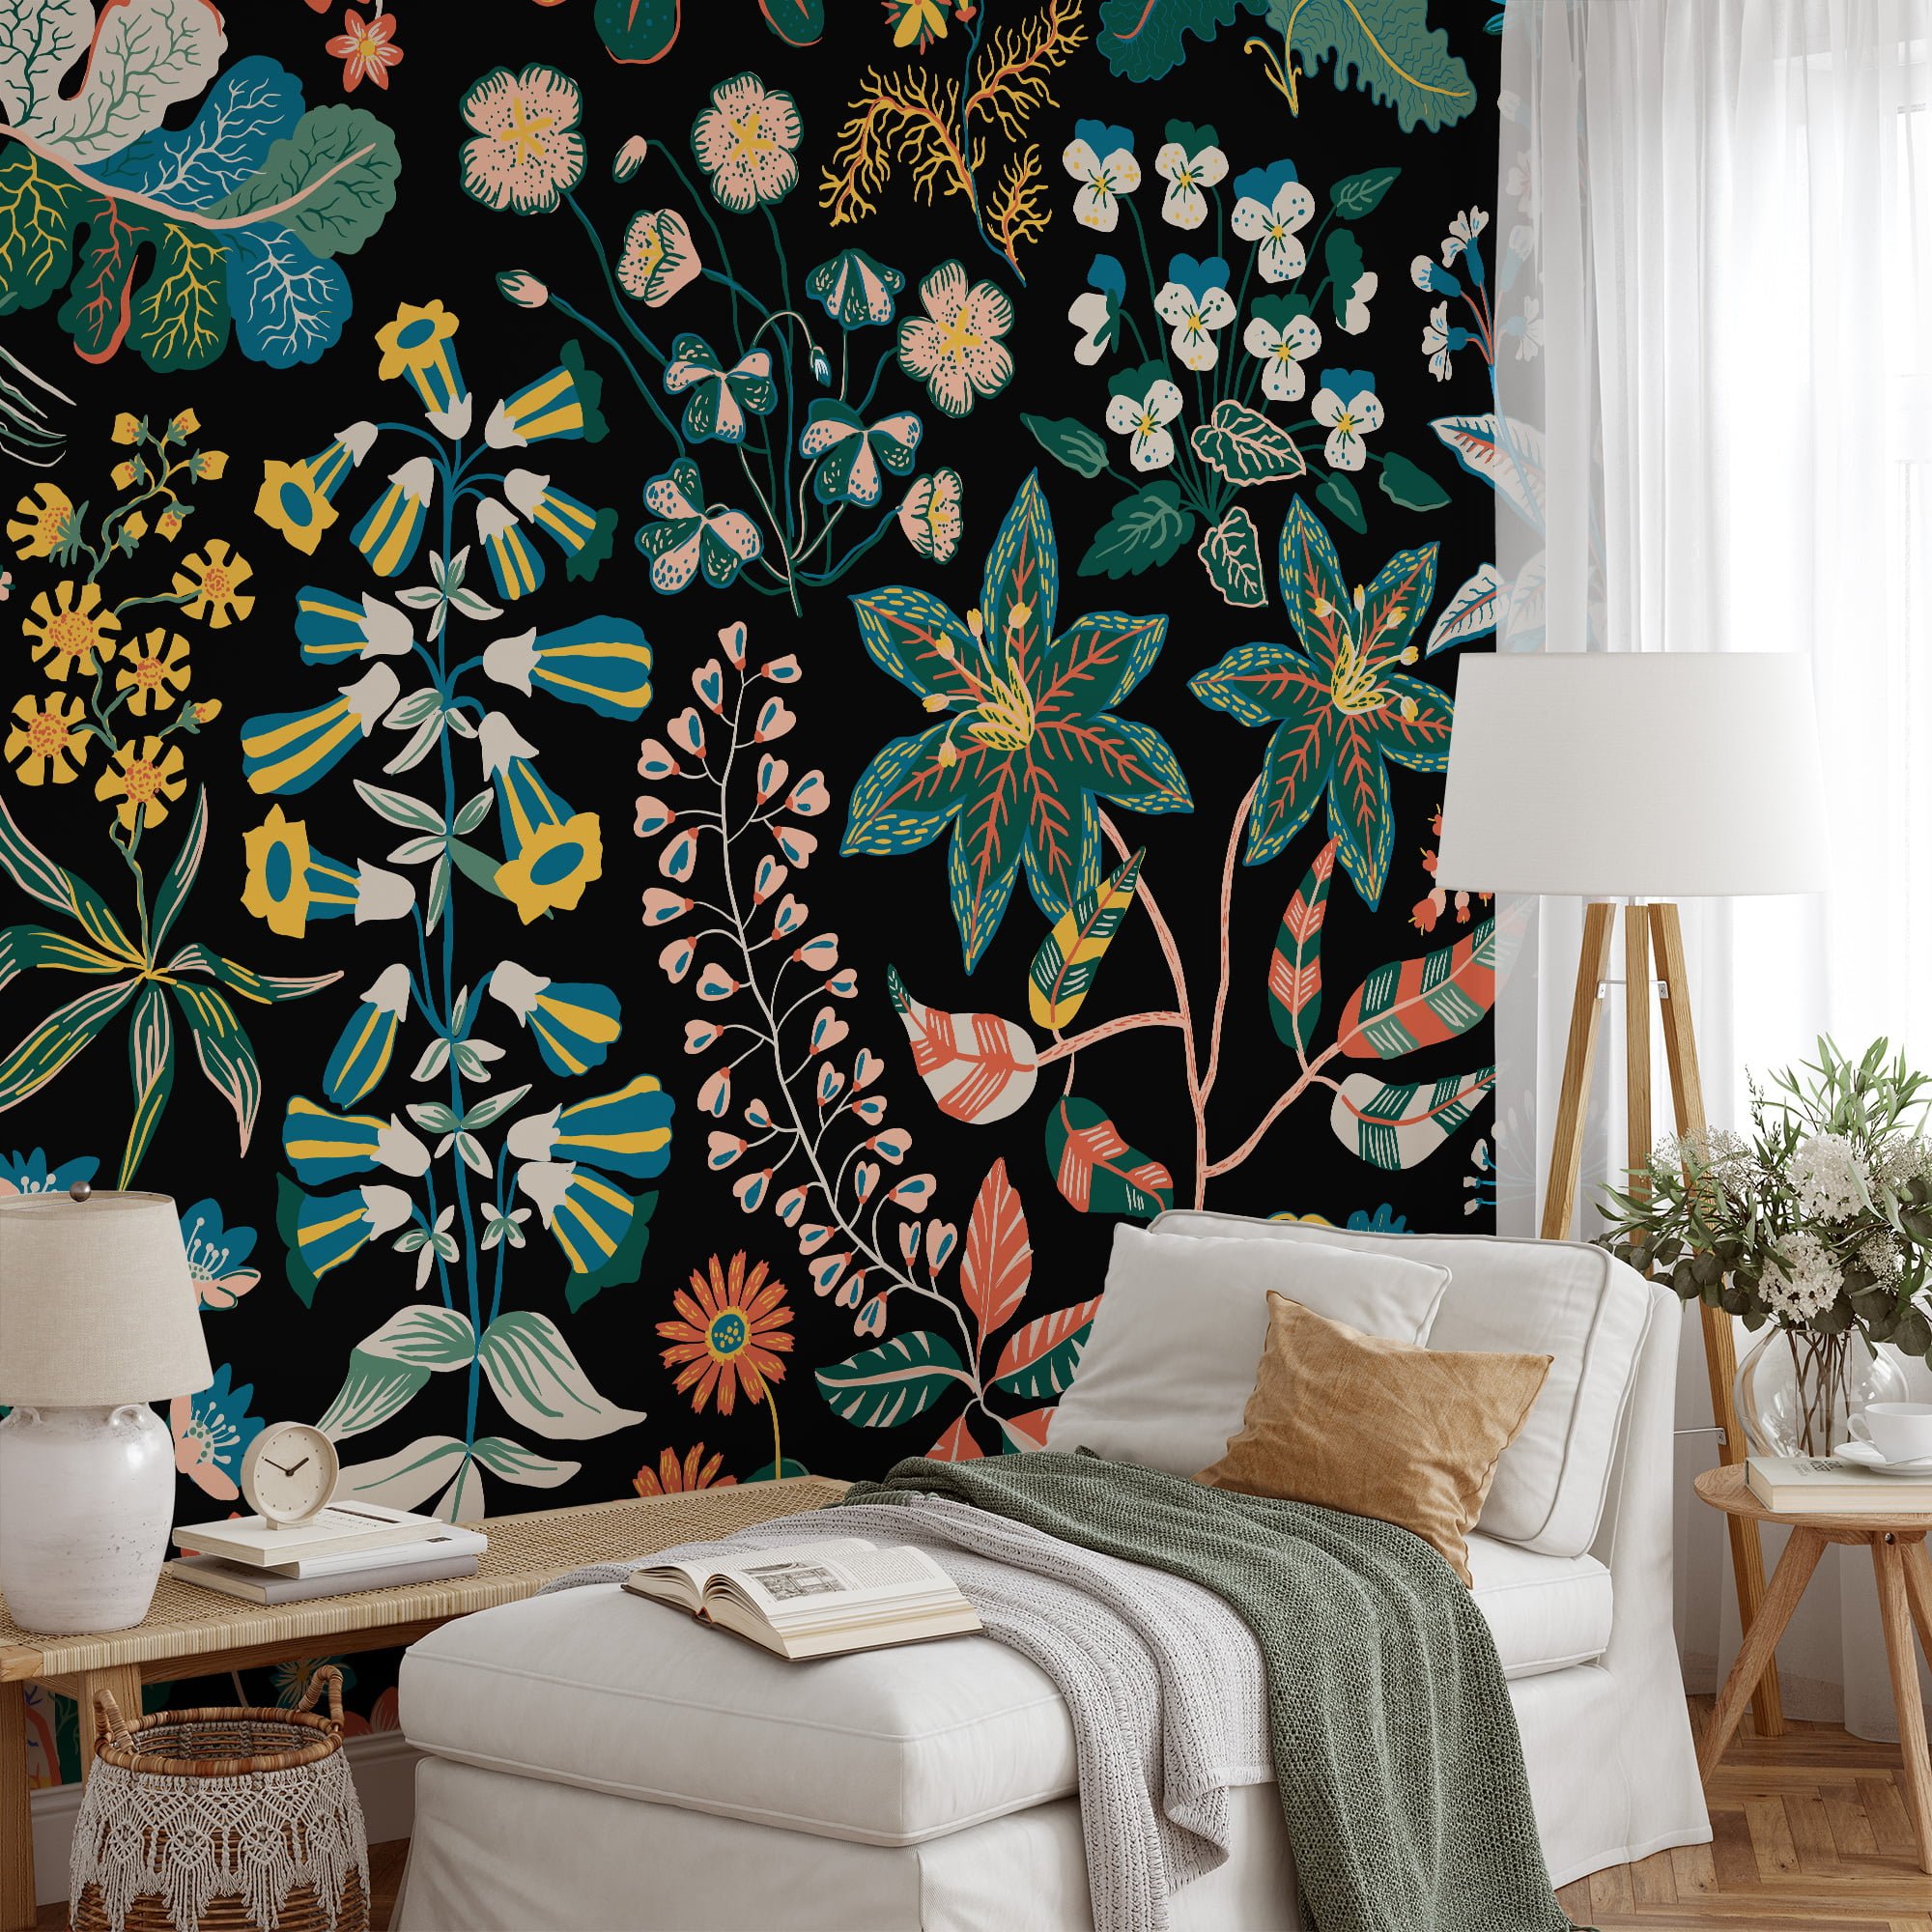 Elegant Flat Style Floral Pattern on Dark Background Wallcovering for a  Bold Statement